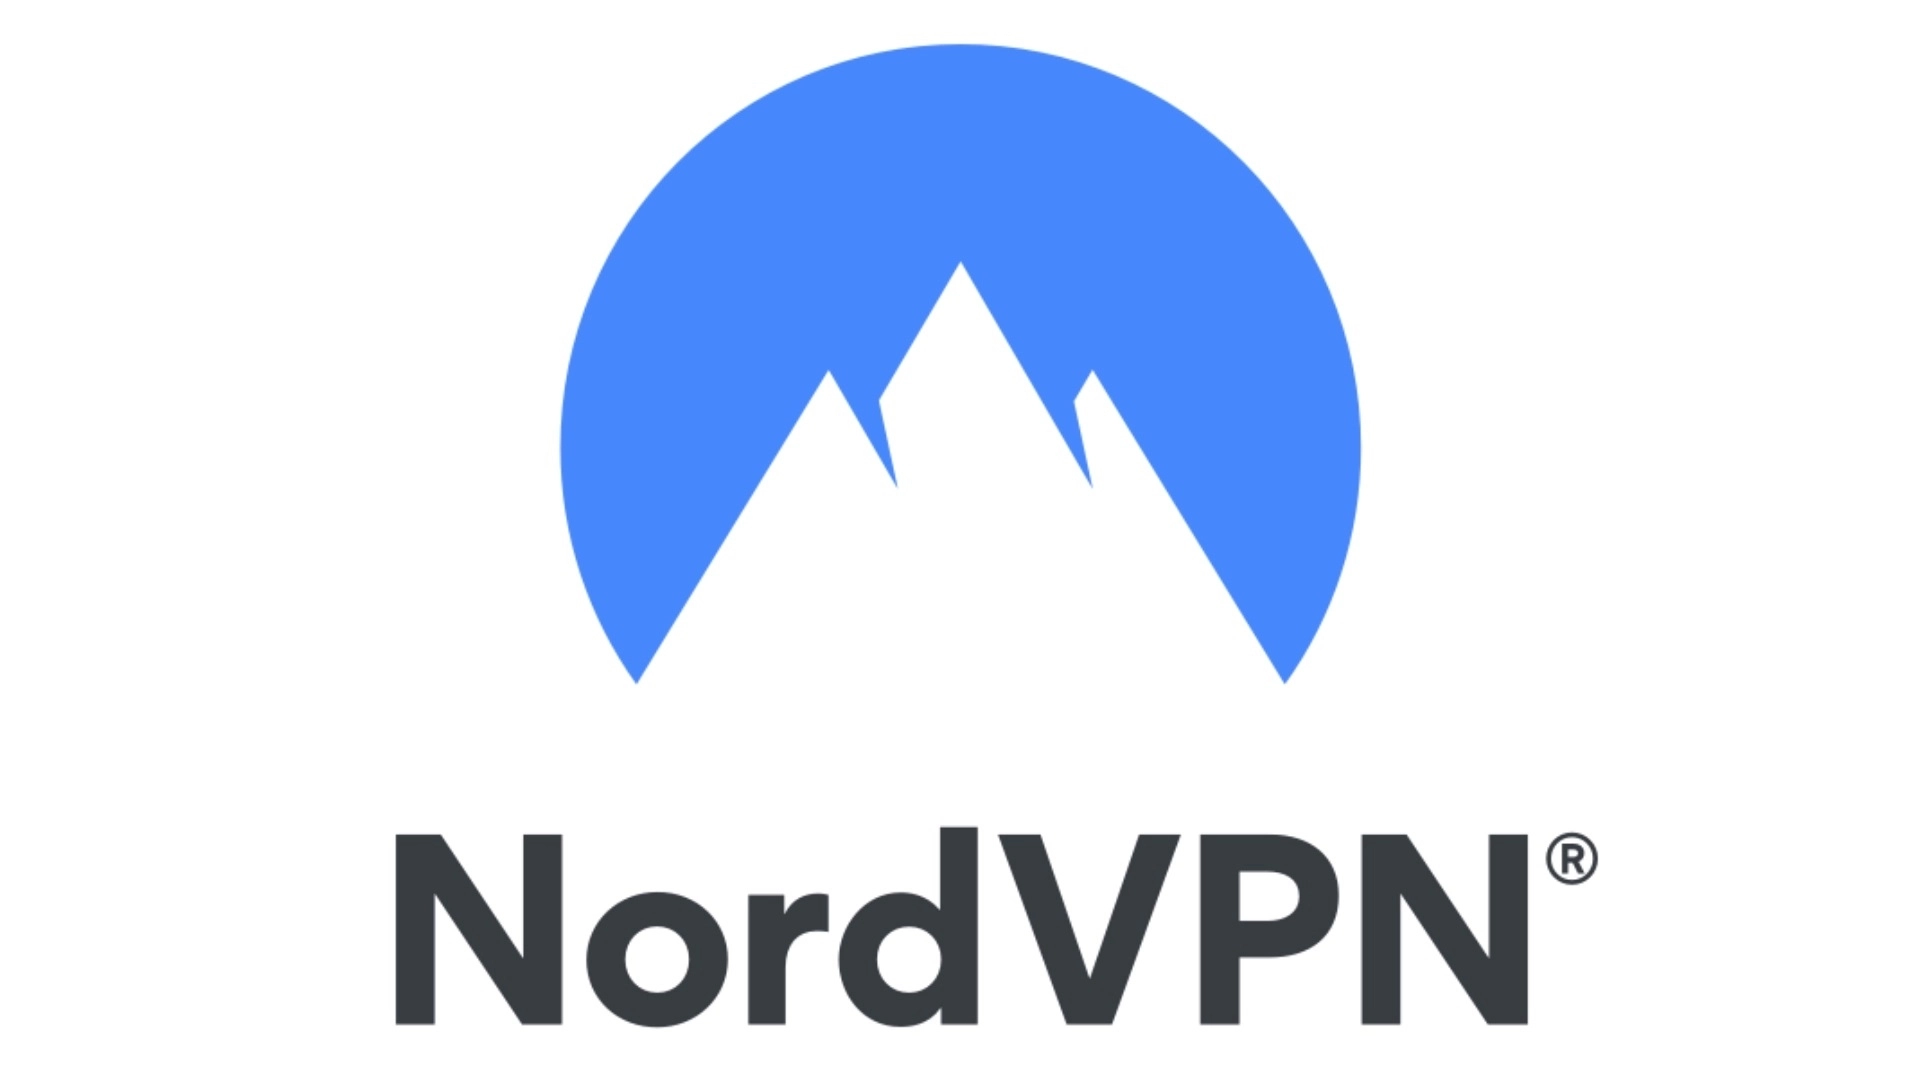 The best Canadian VPN is NordVPN.  The image shows the company logo.